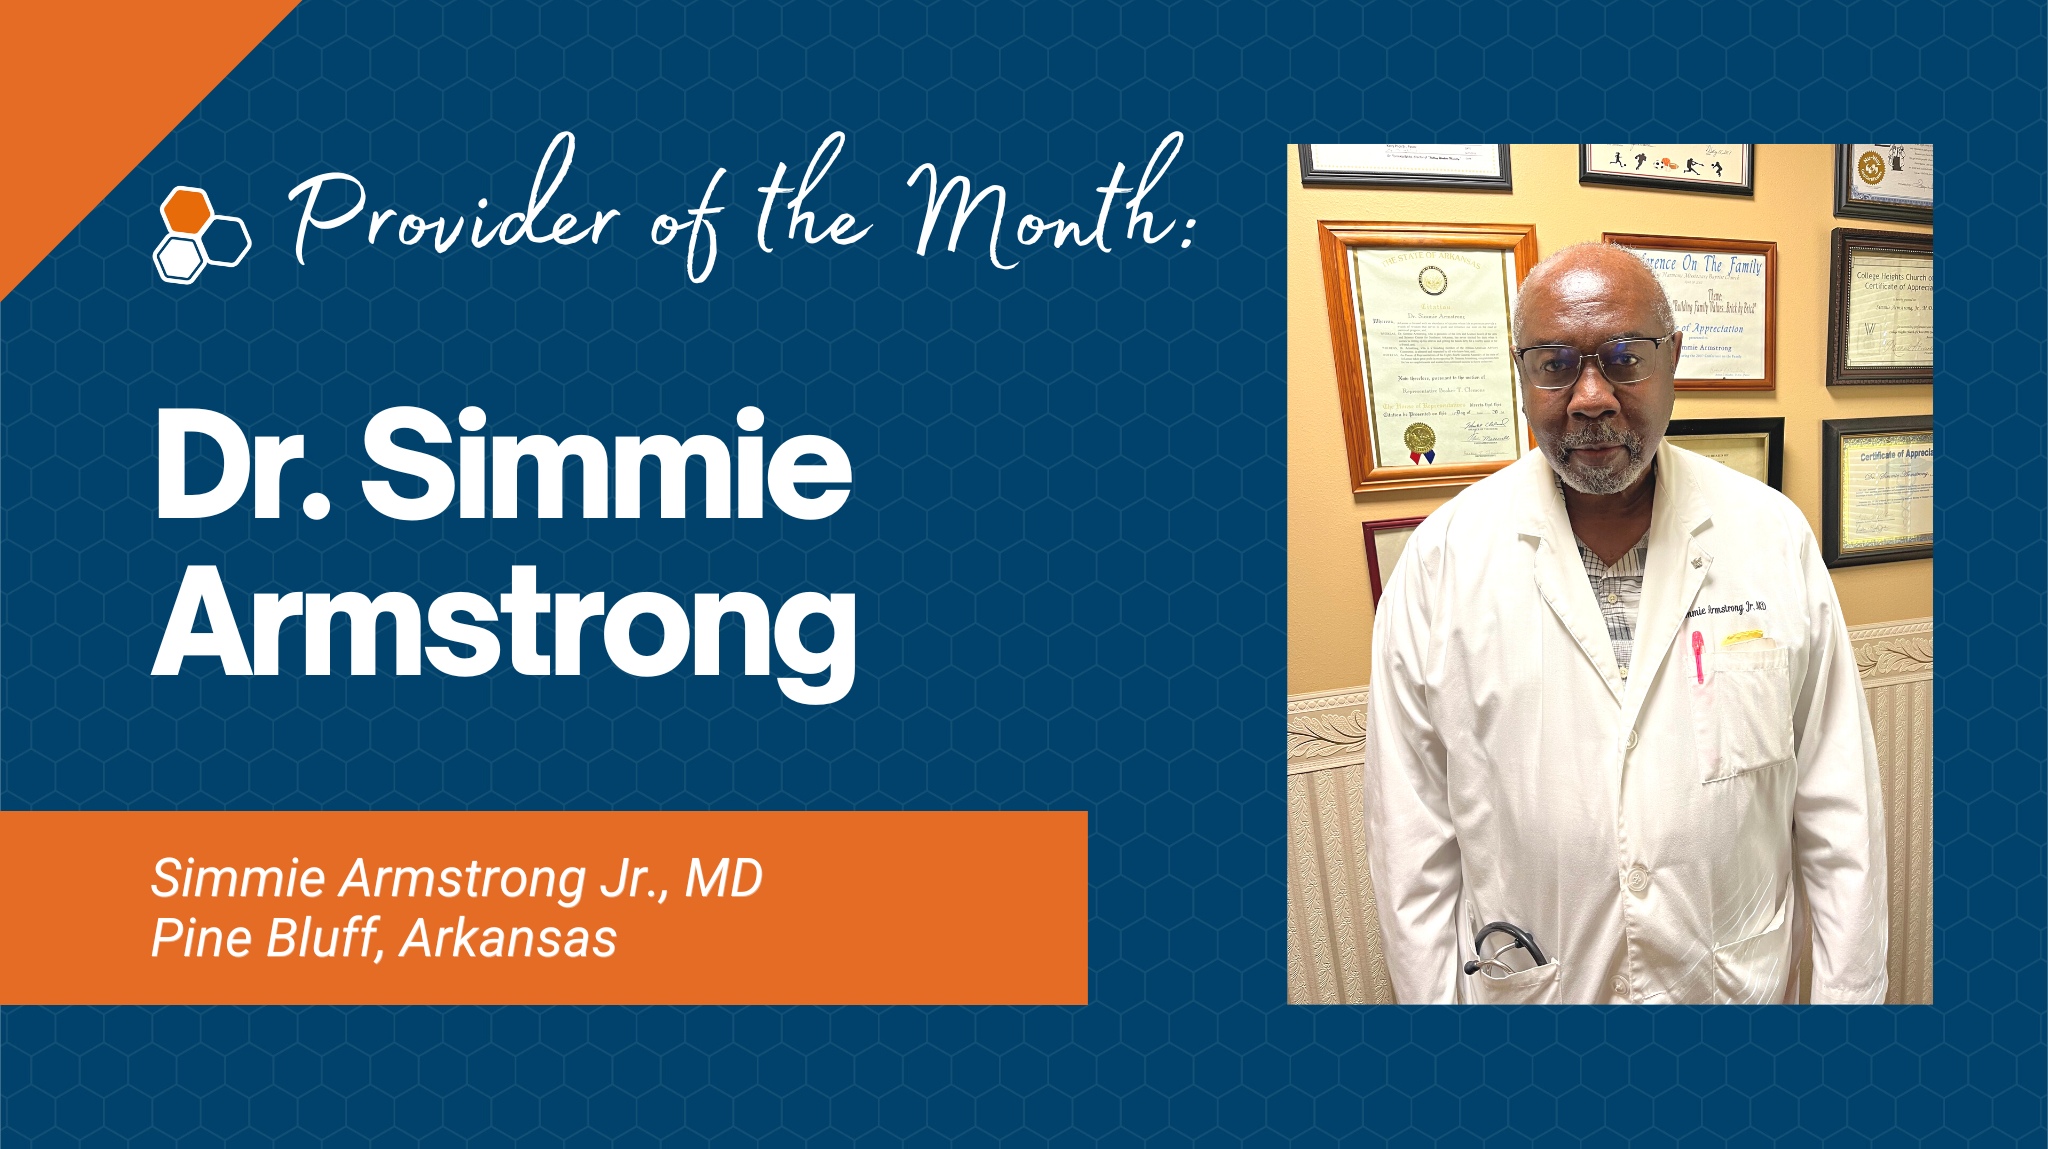 dr. simmie armstrong provider of the month